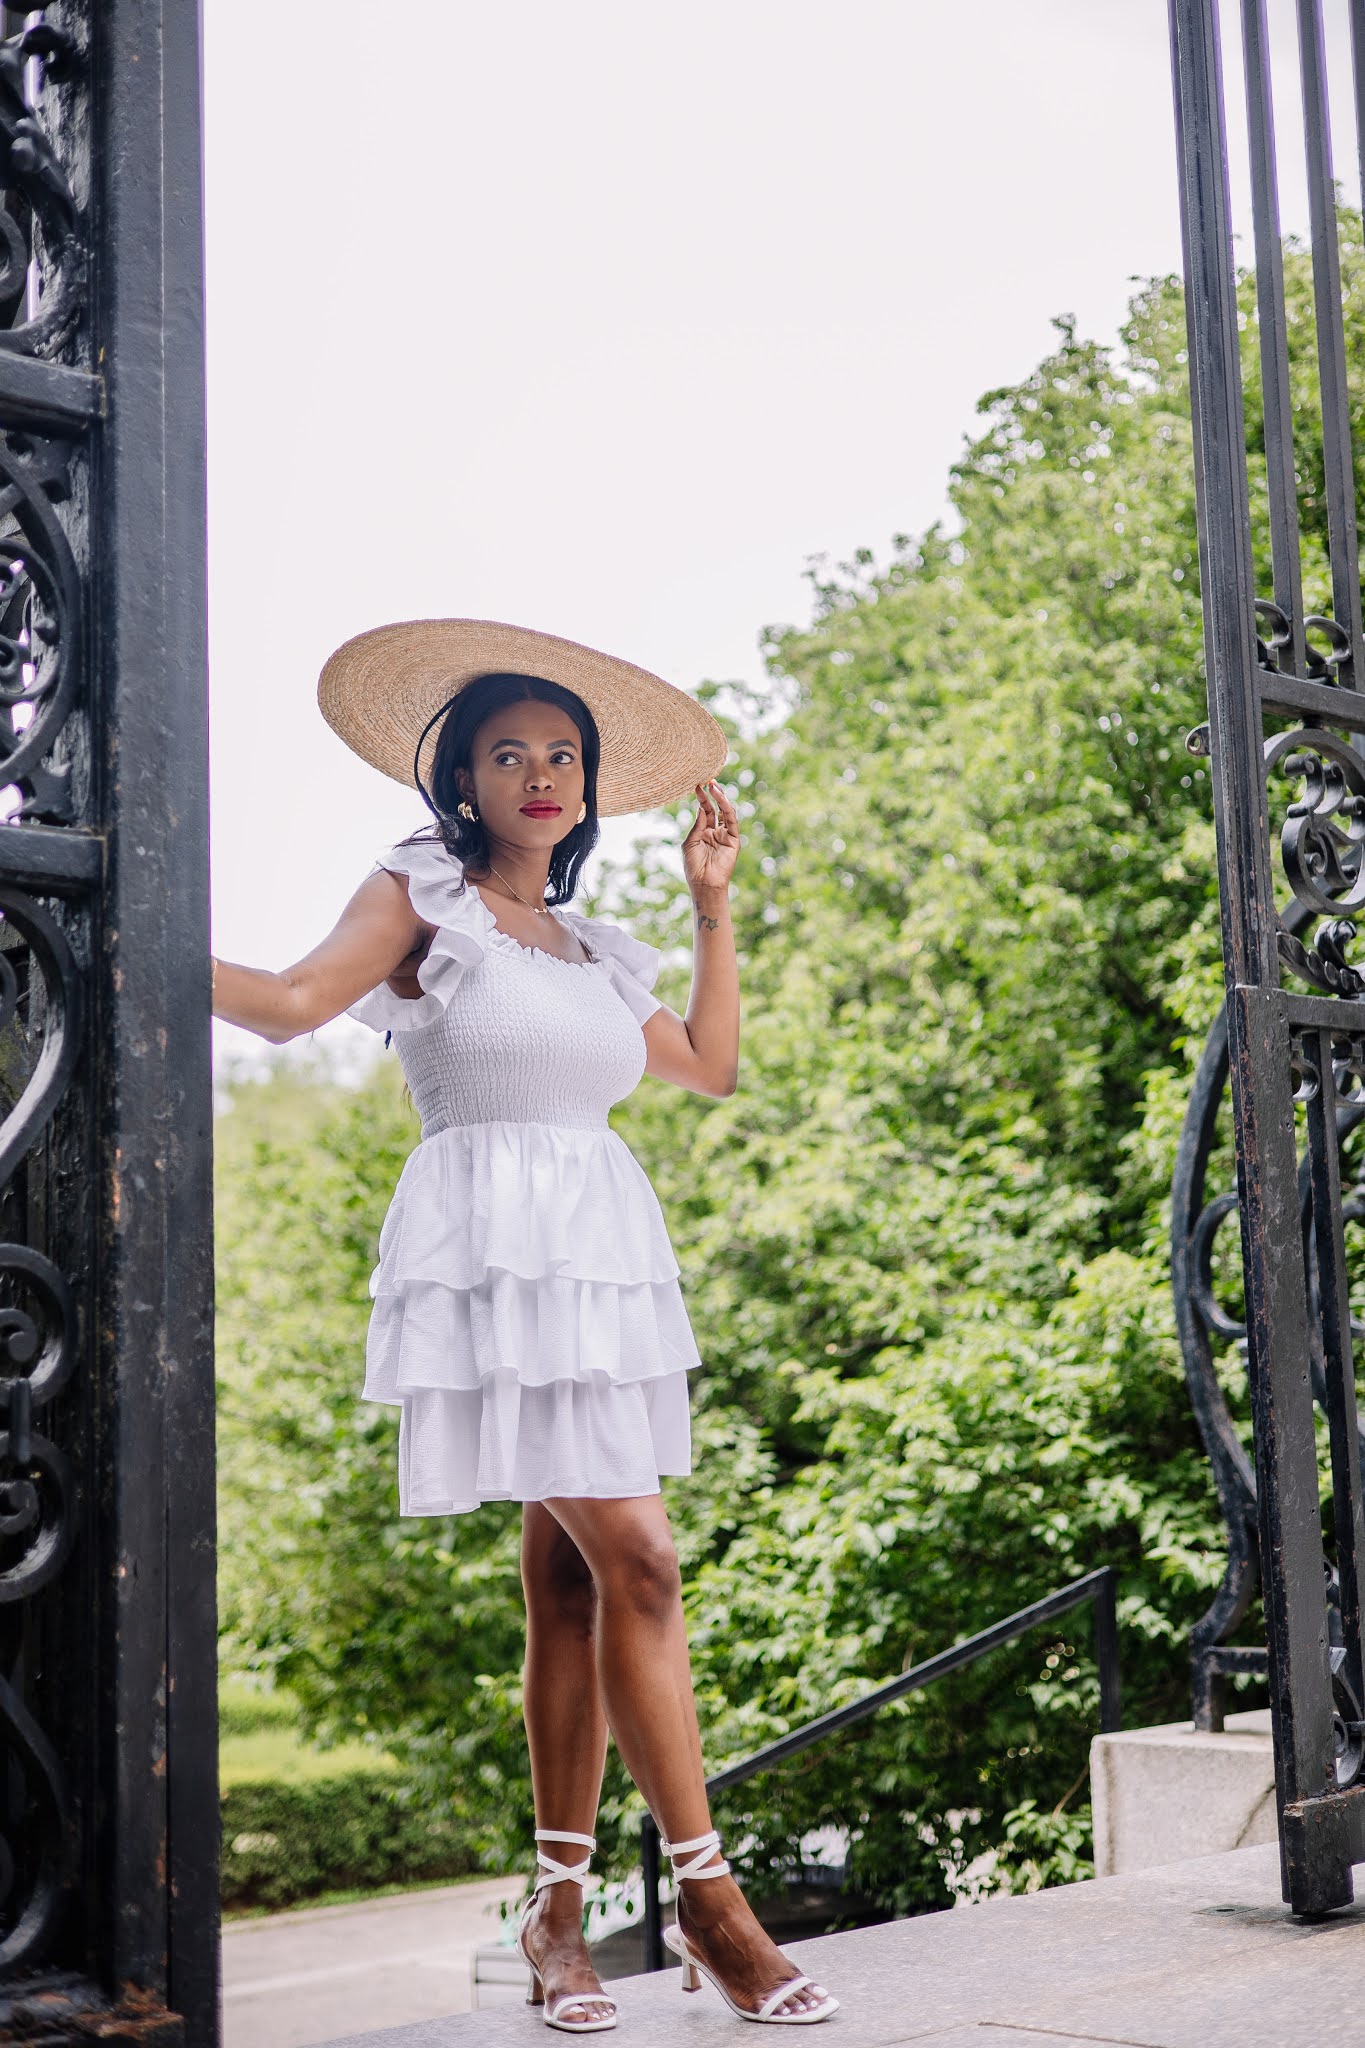 Dadou~Chic: Top 5 White Dresses from Express for This Summer Under $100!